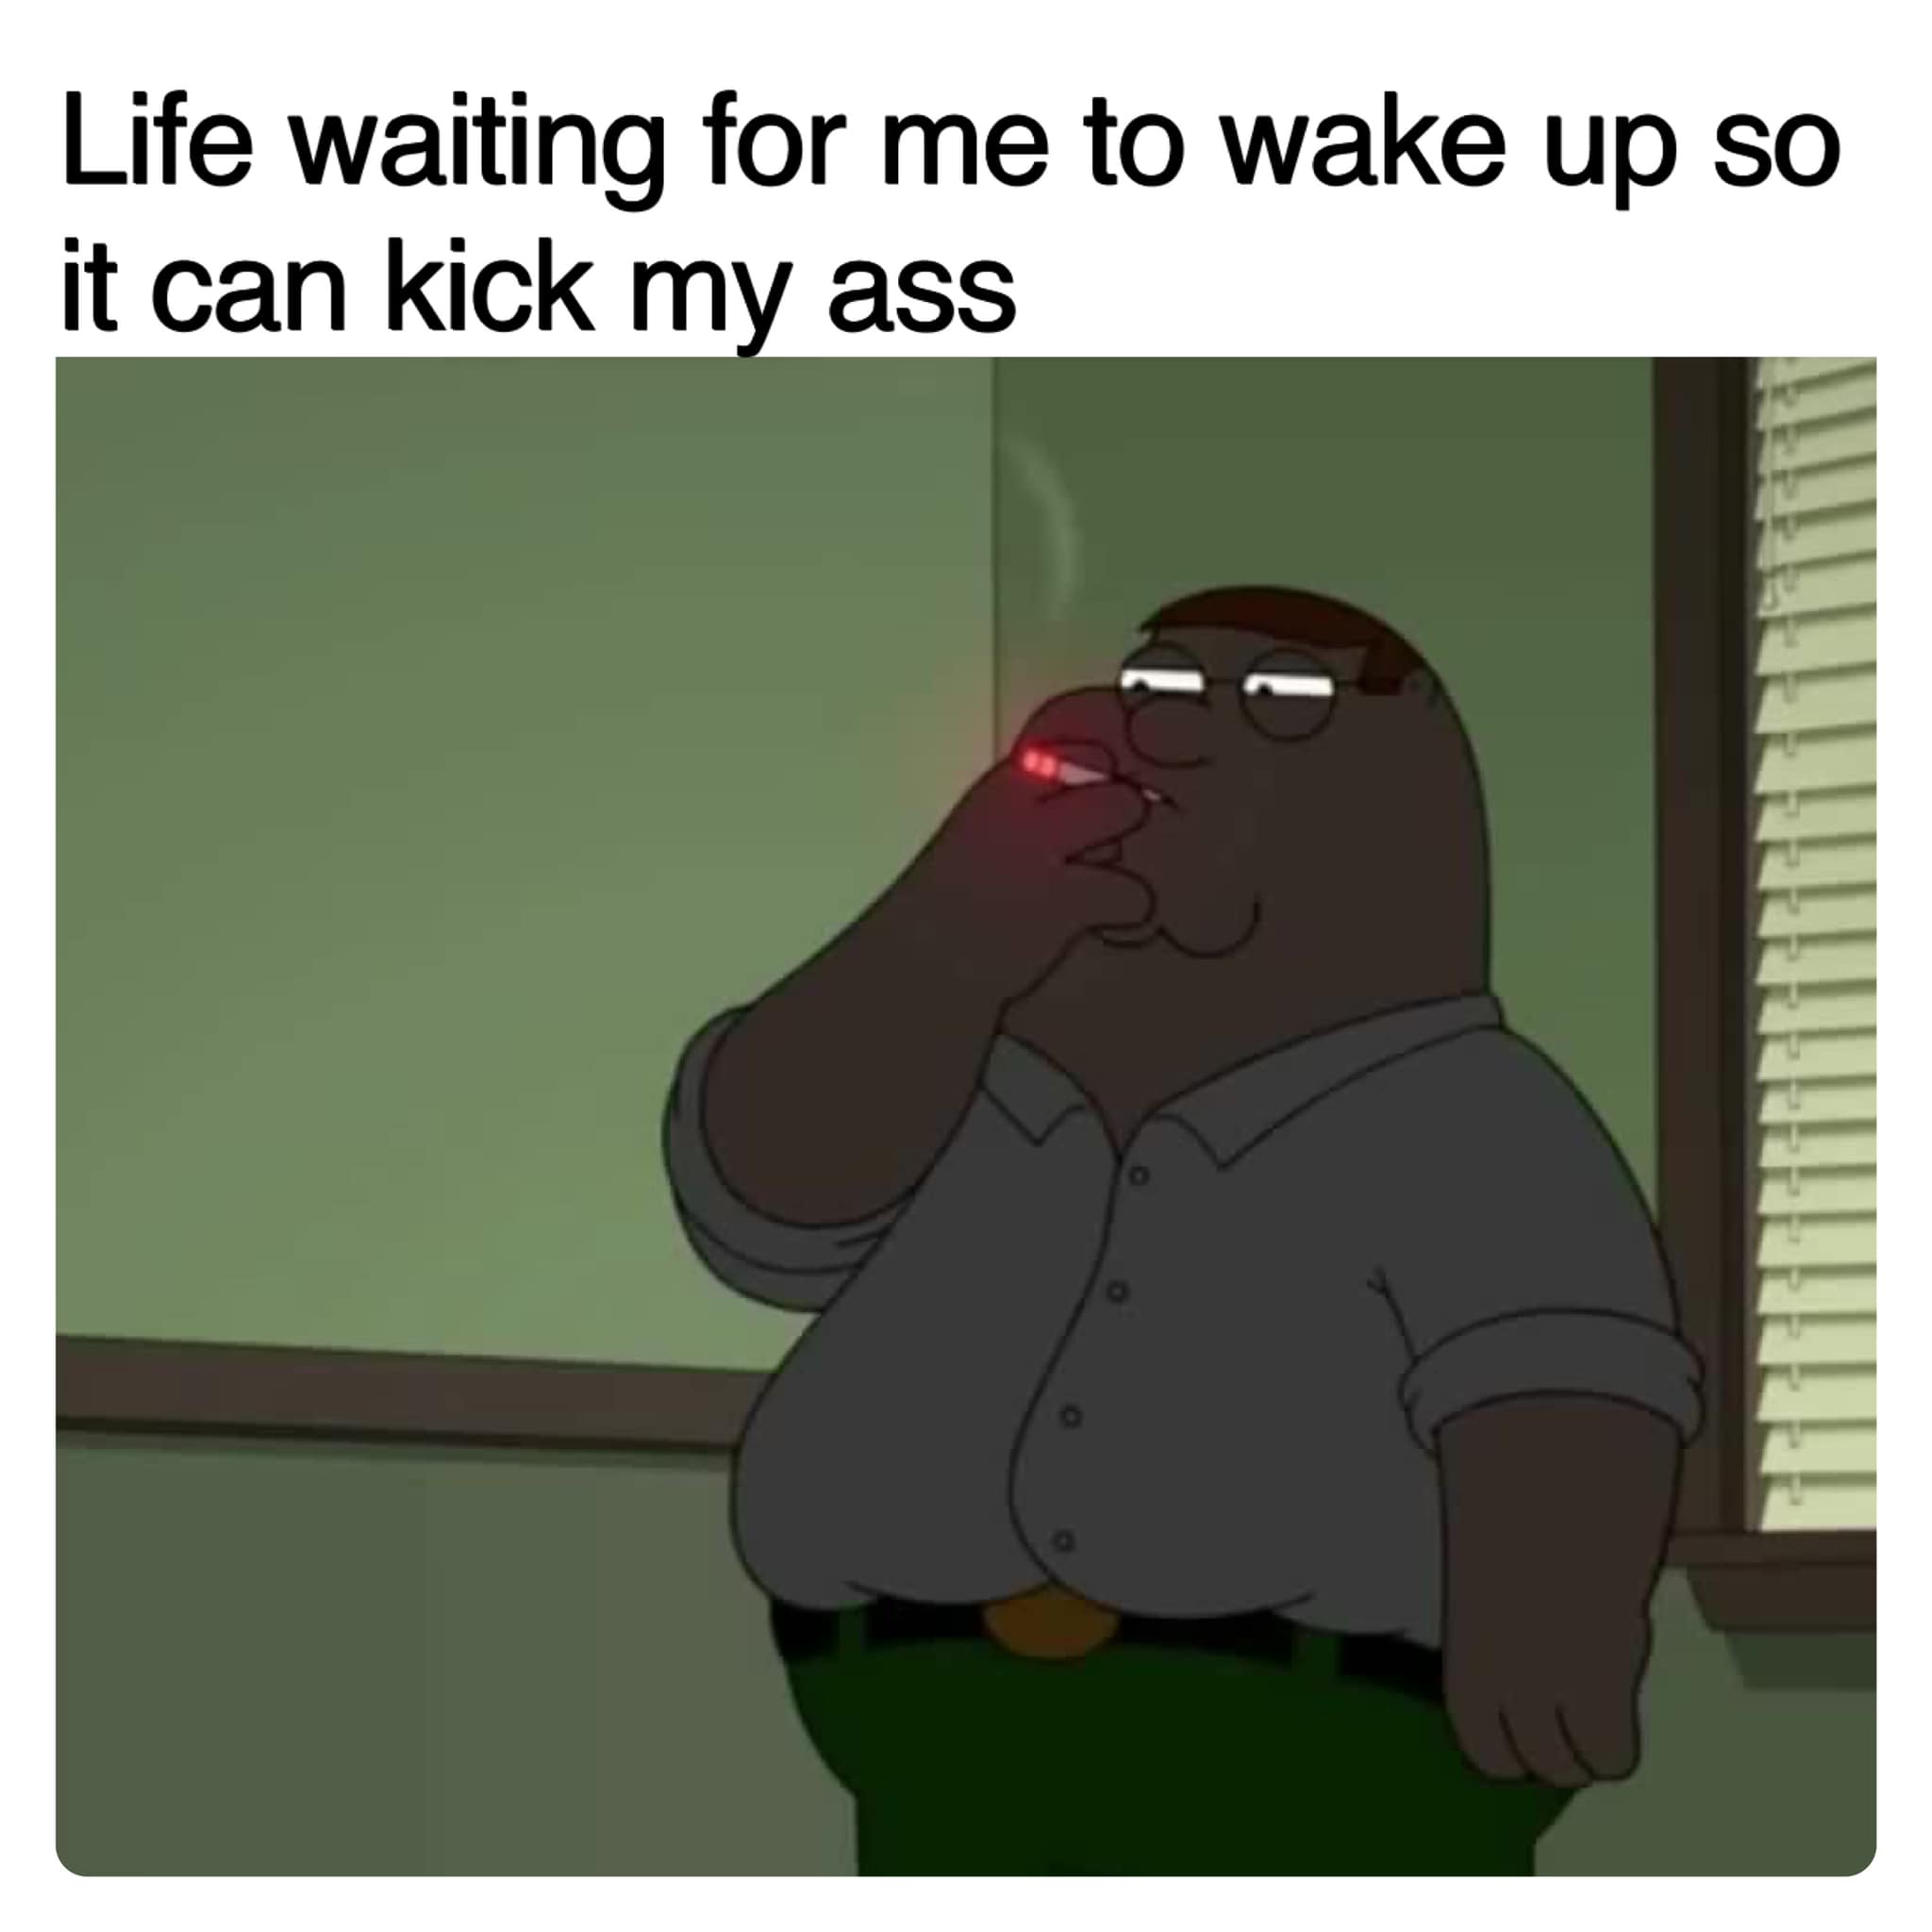 savage memes - big w - Life waiting for me to wake up so it can kick my ass O